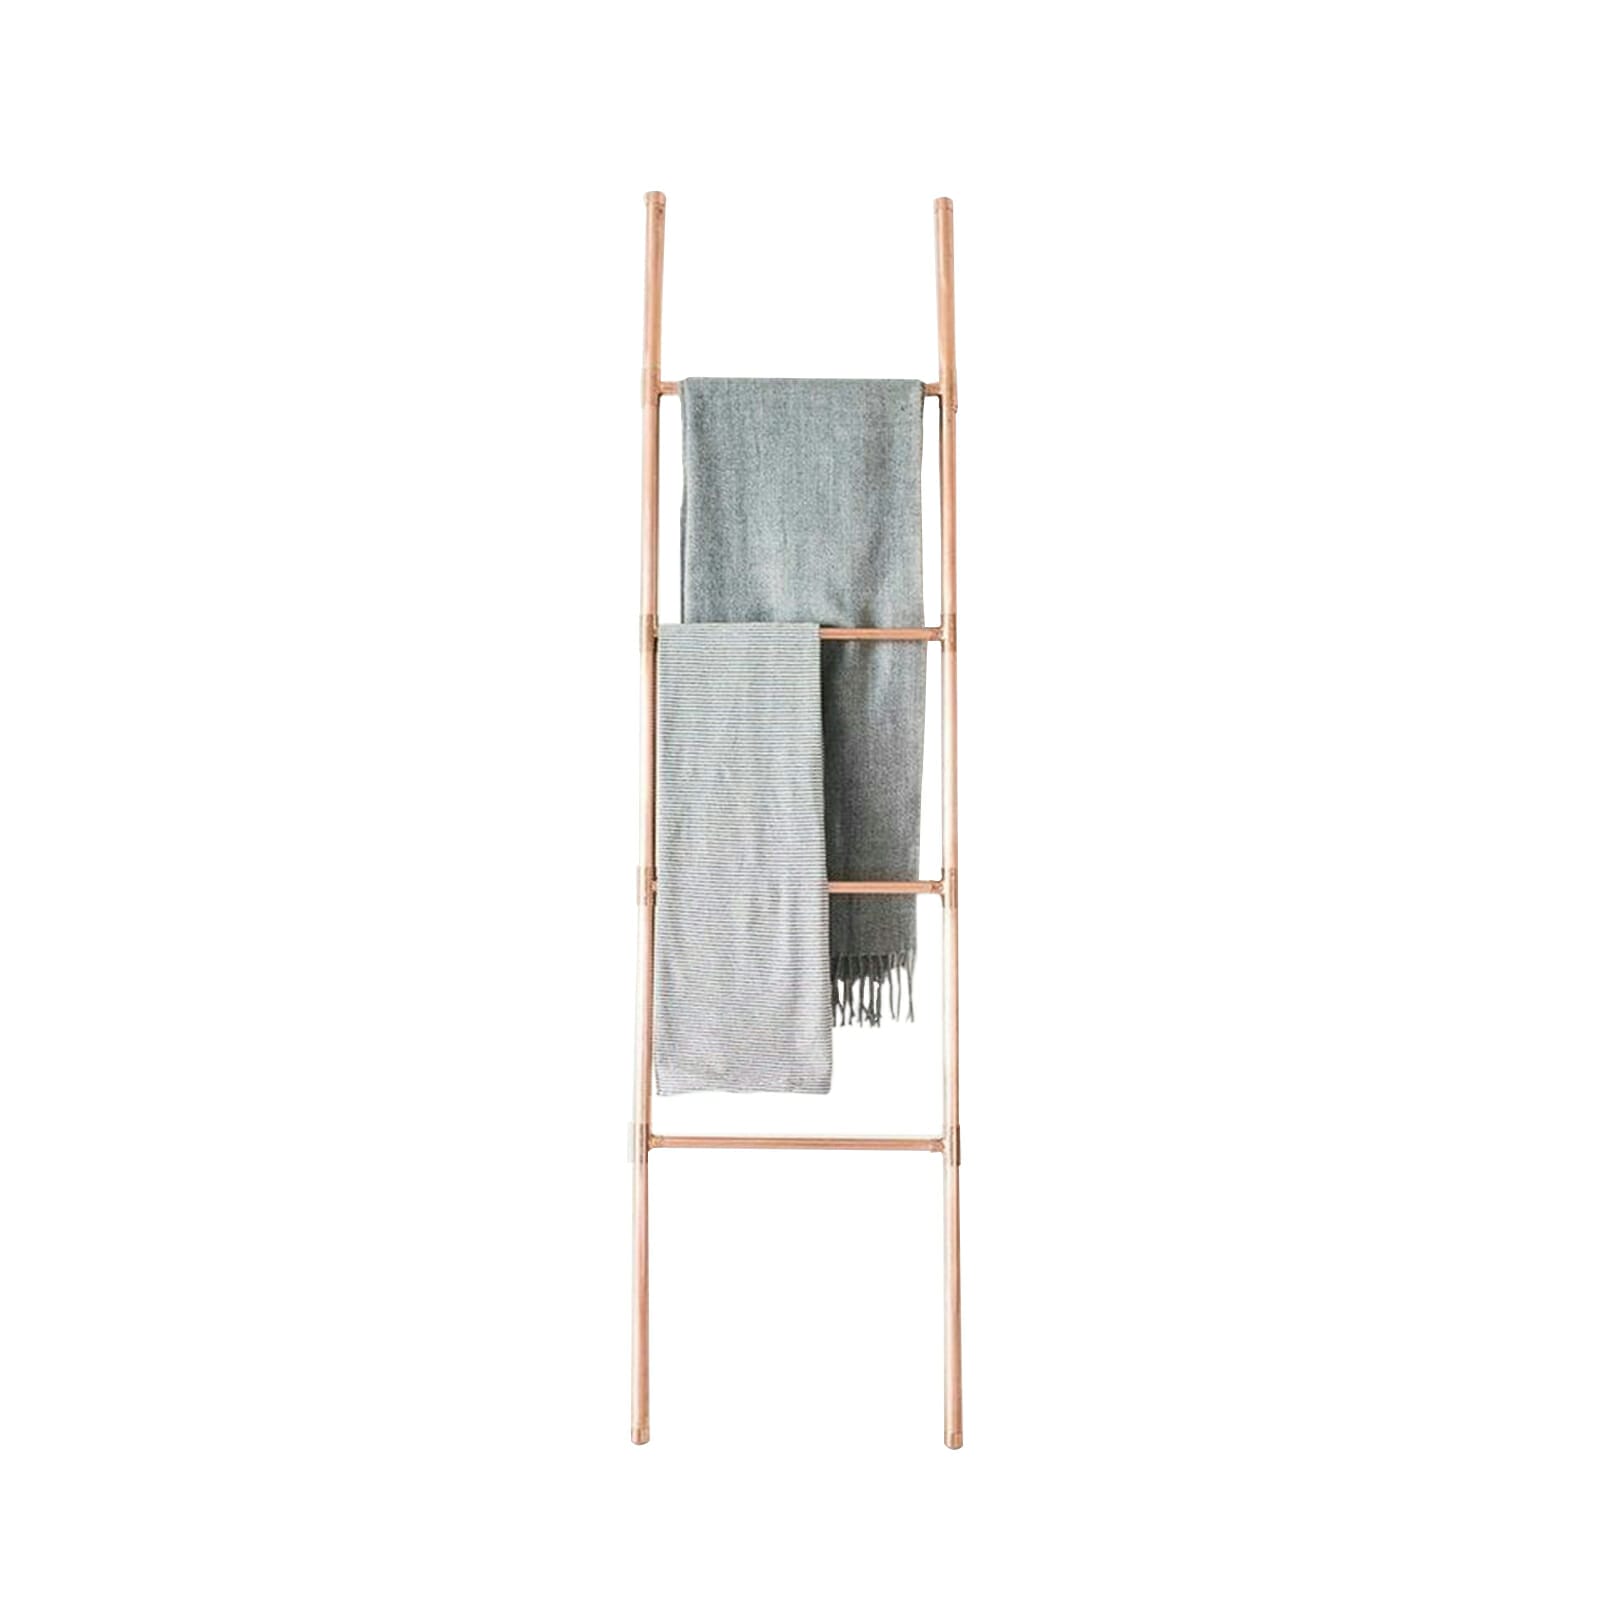 Pipe Ladder Towel Rail | Copper Industrial Pipe Style - Pipe Dream ...